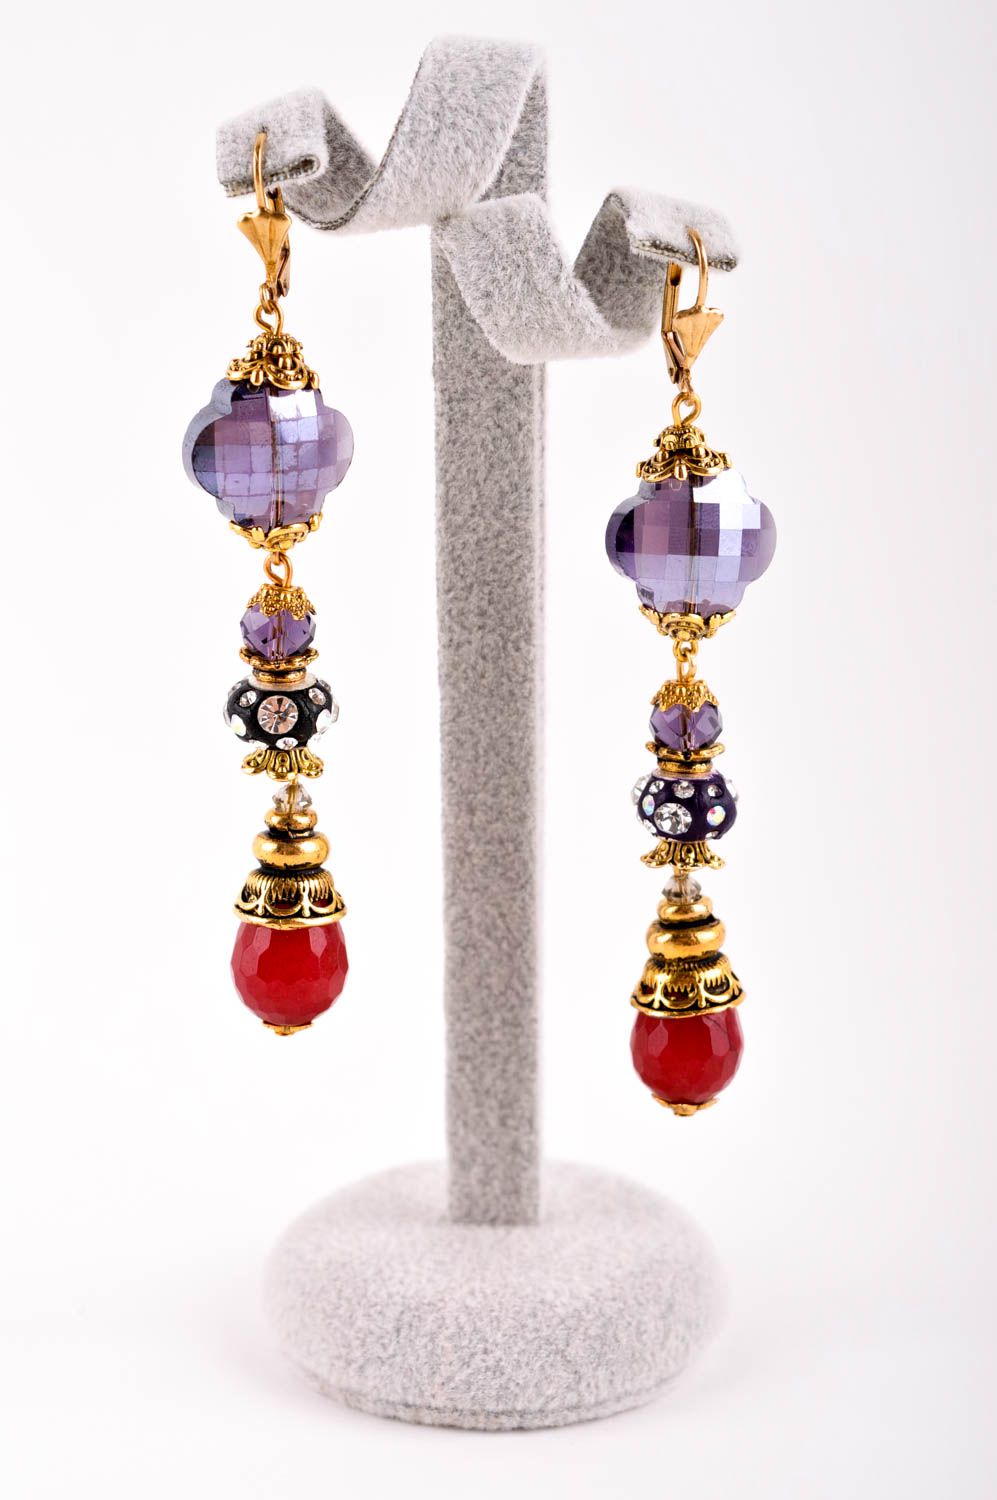 Handmade earrings with natural stones stylish accessories fashion jewelry photo 2